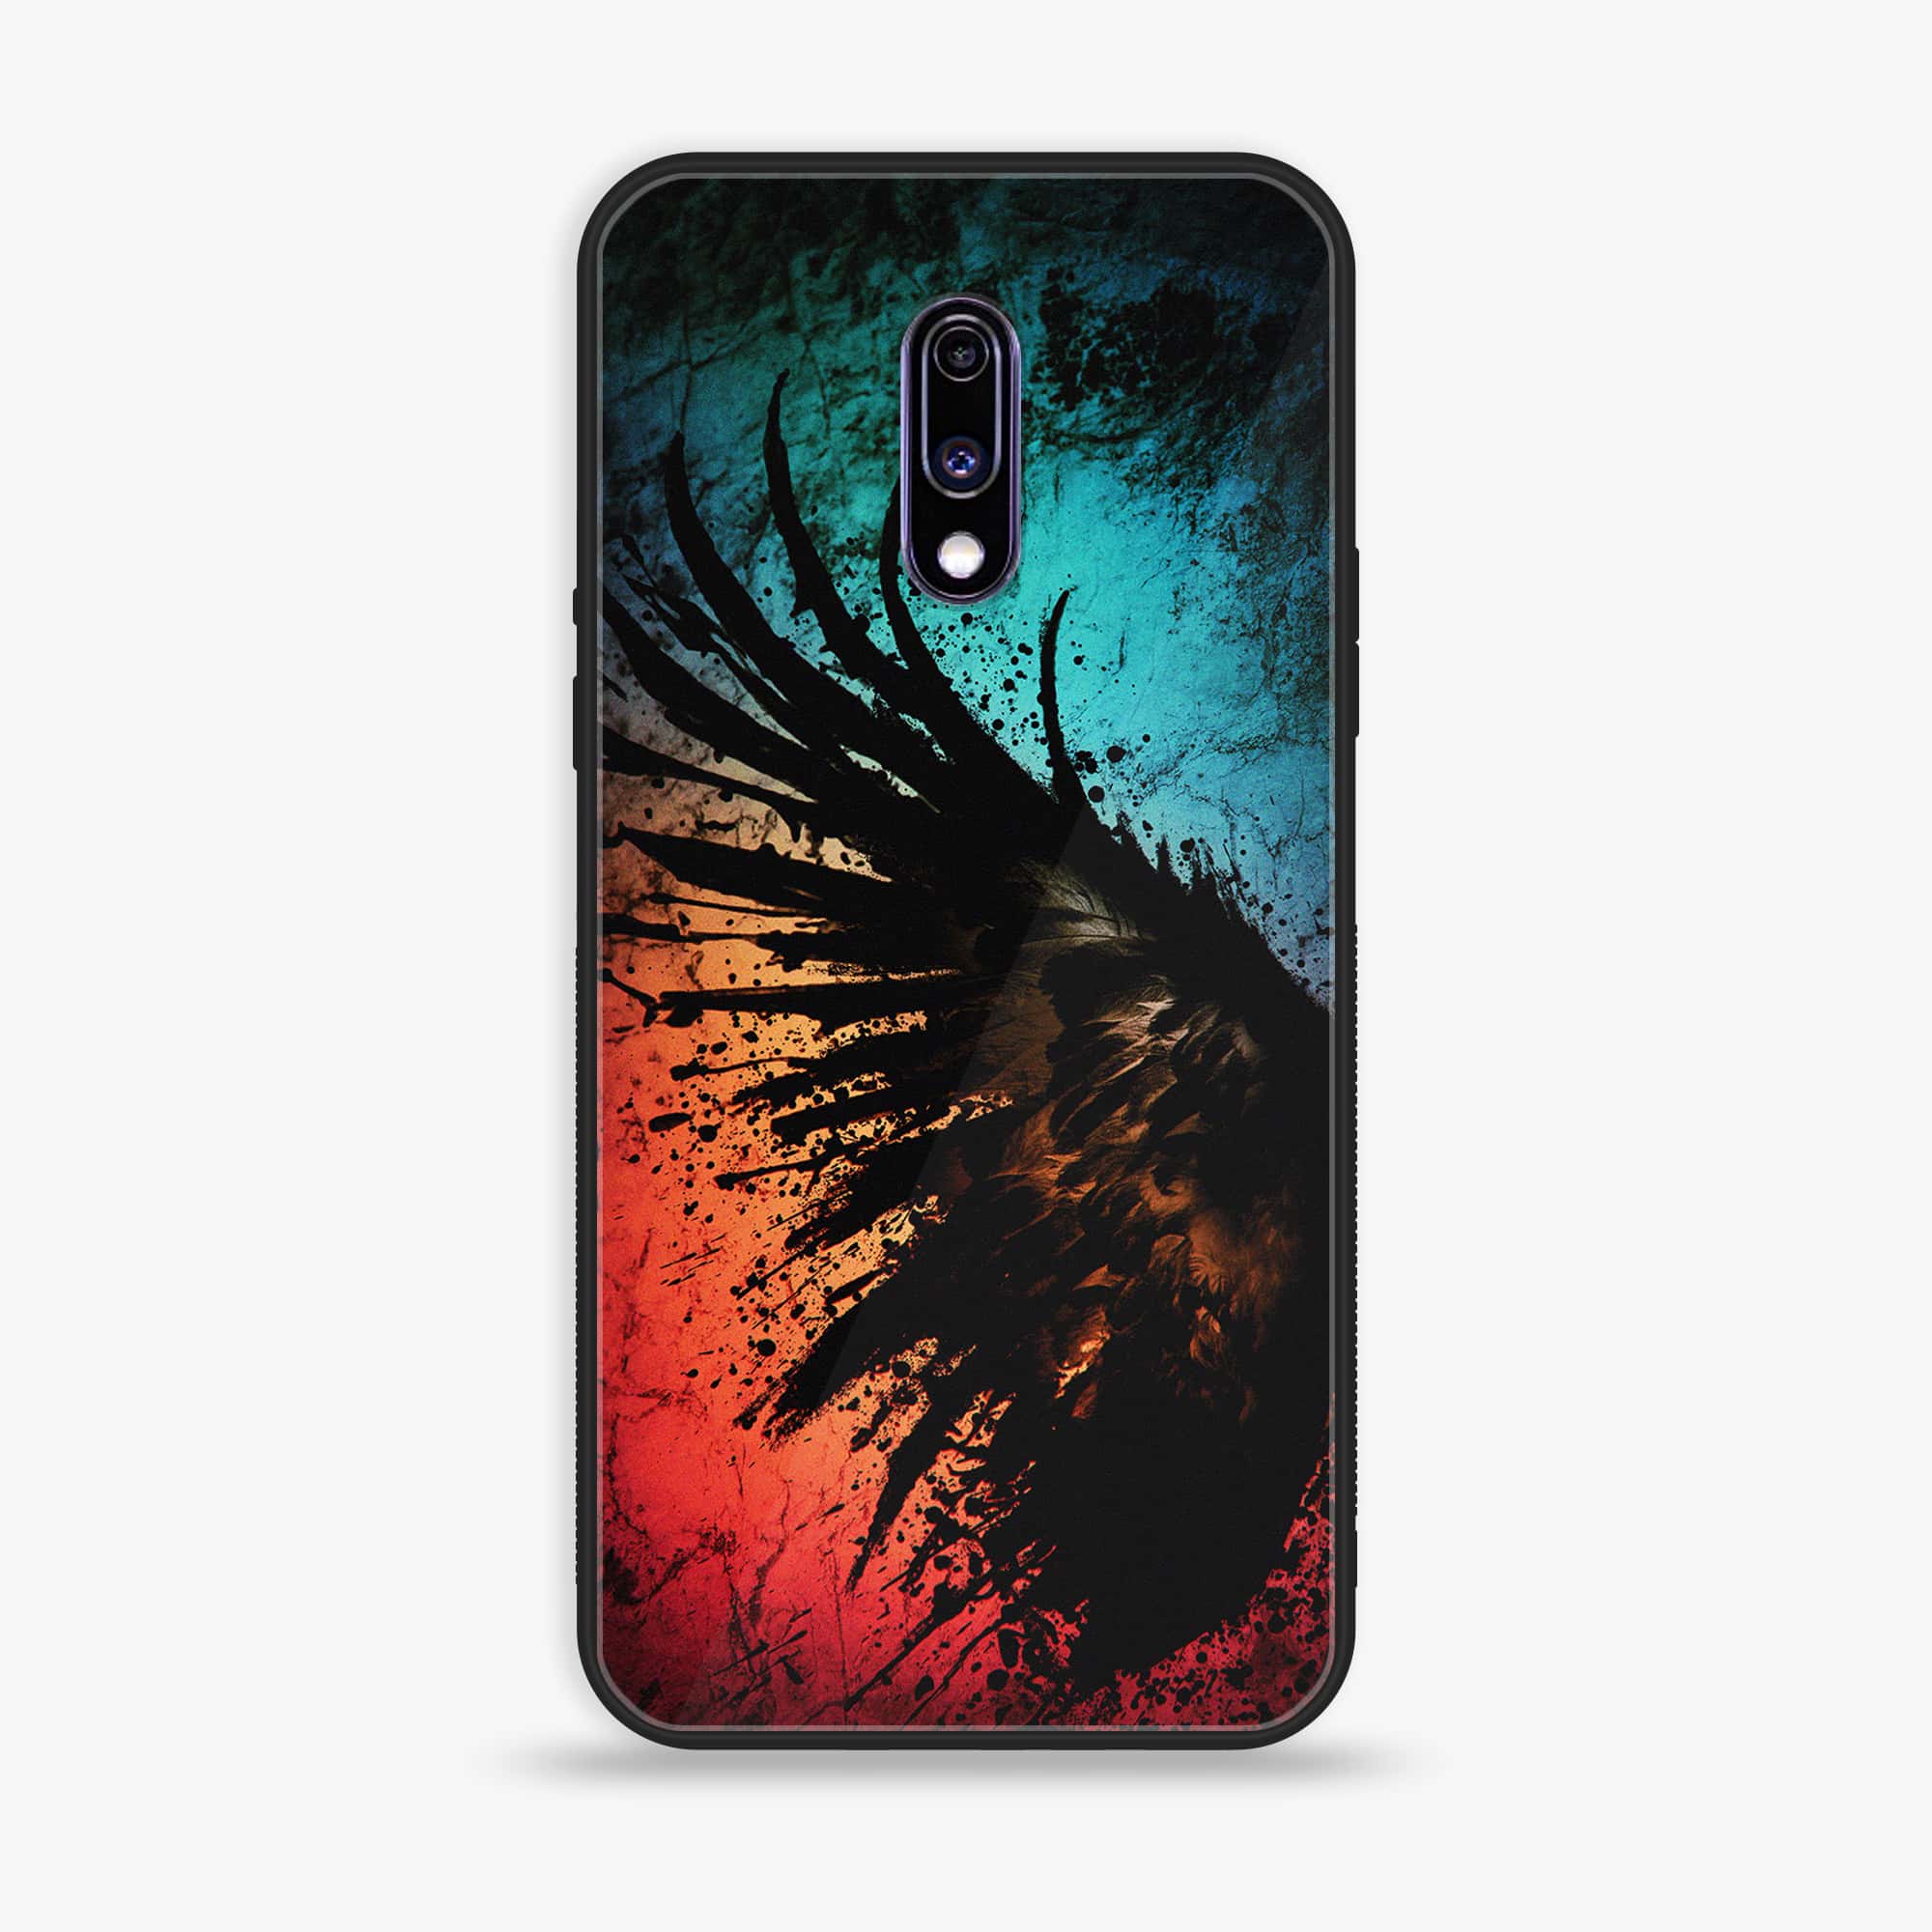 OnePlus 7 - Angel Wings 2.0 - Premium Printed Glass soft Bumper shock Proof Case